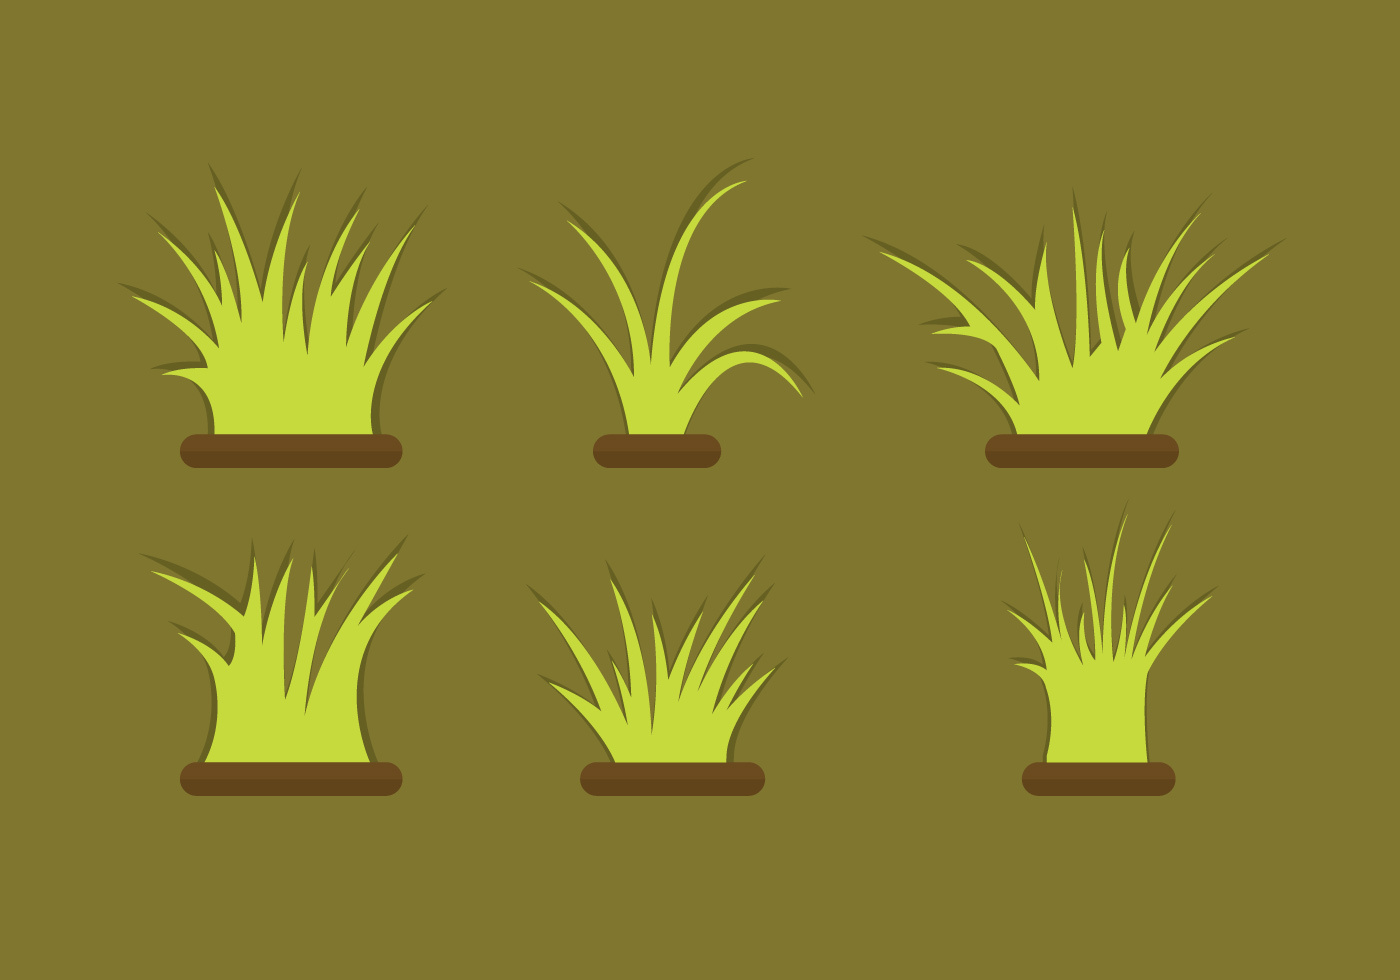 vector free download grass - photo #8